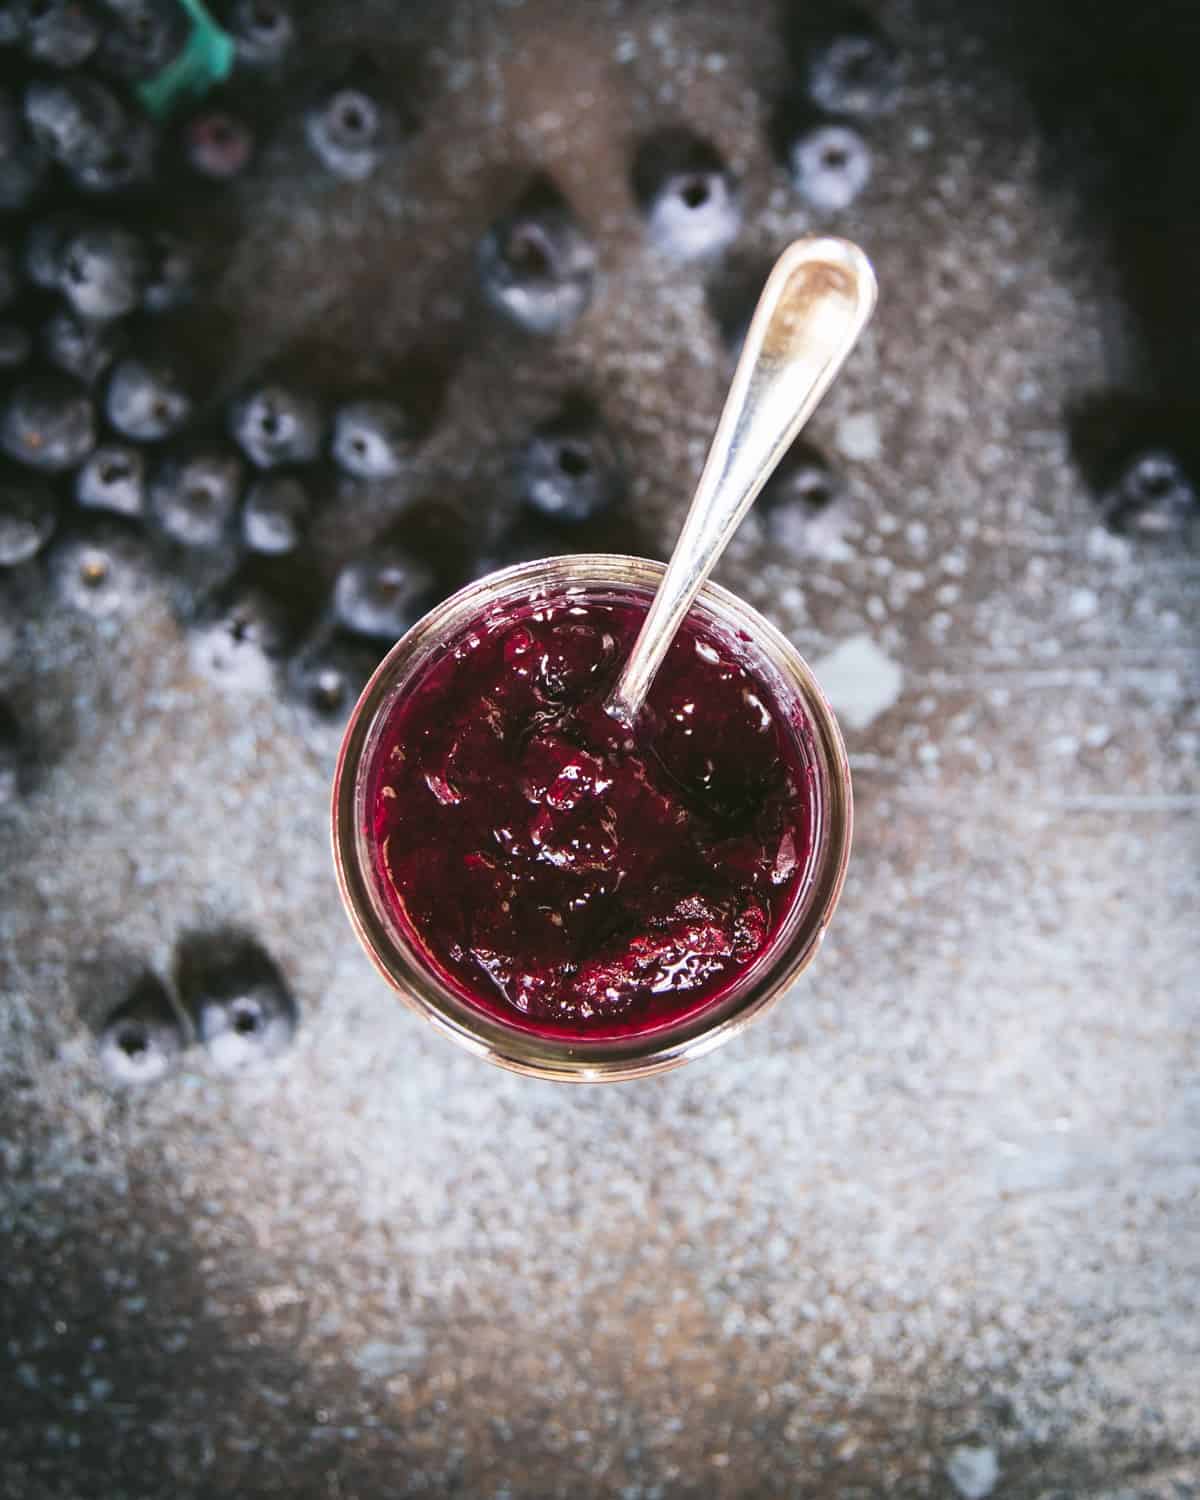 Top view of an open jam jar with a spoon and blueberries surrounding. 